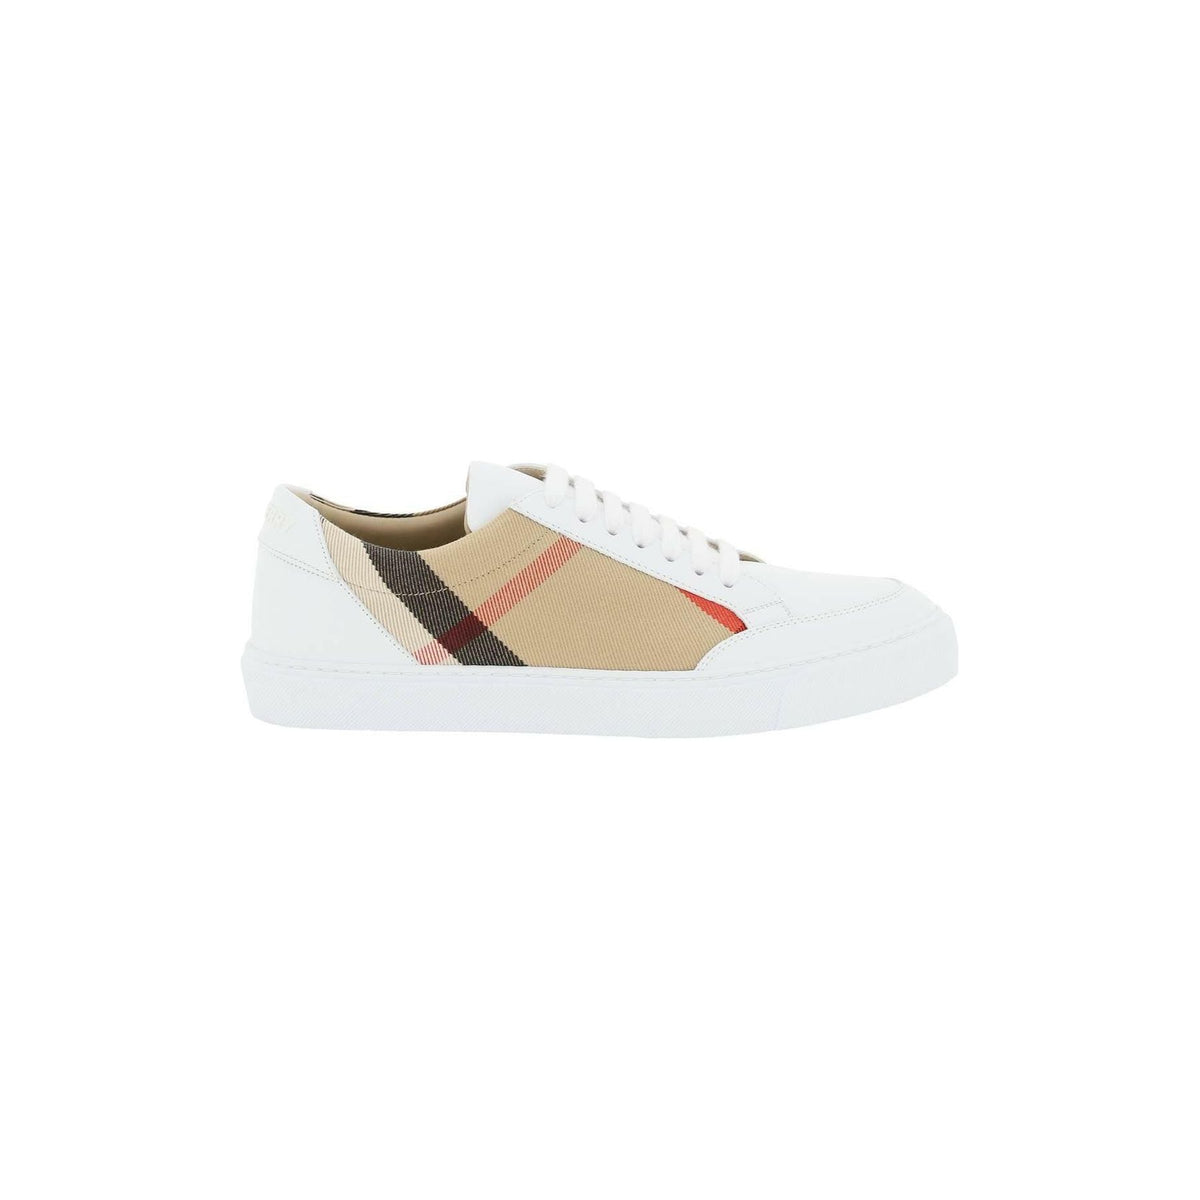 BURBERRY - Optic White House Check and Leather Sneakers - JOHN JULIA